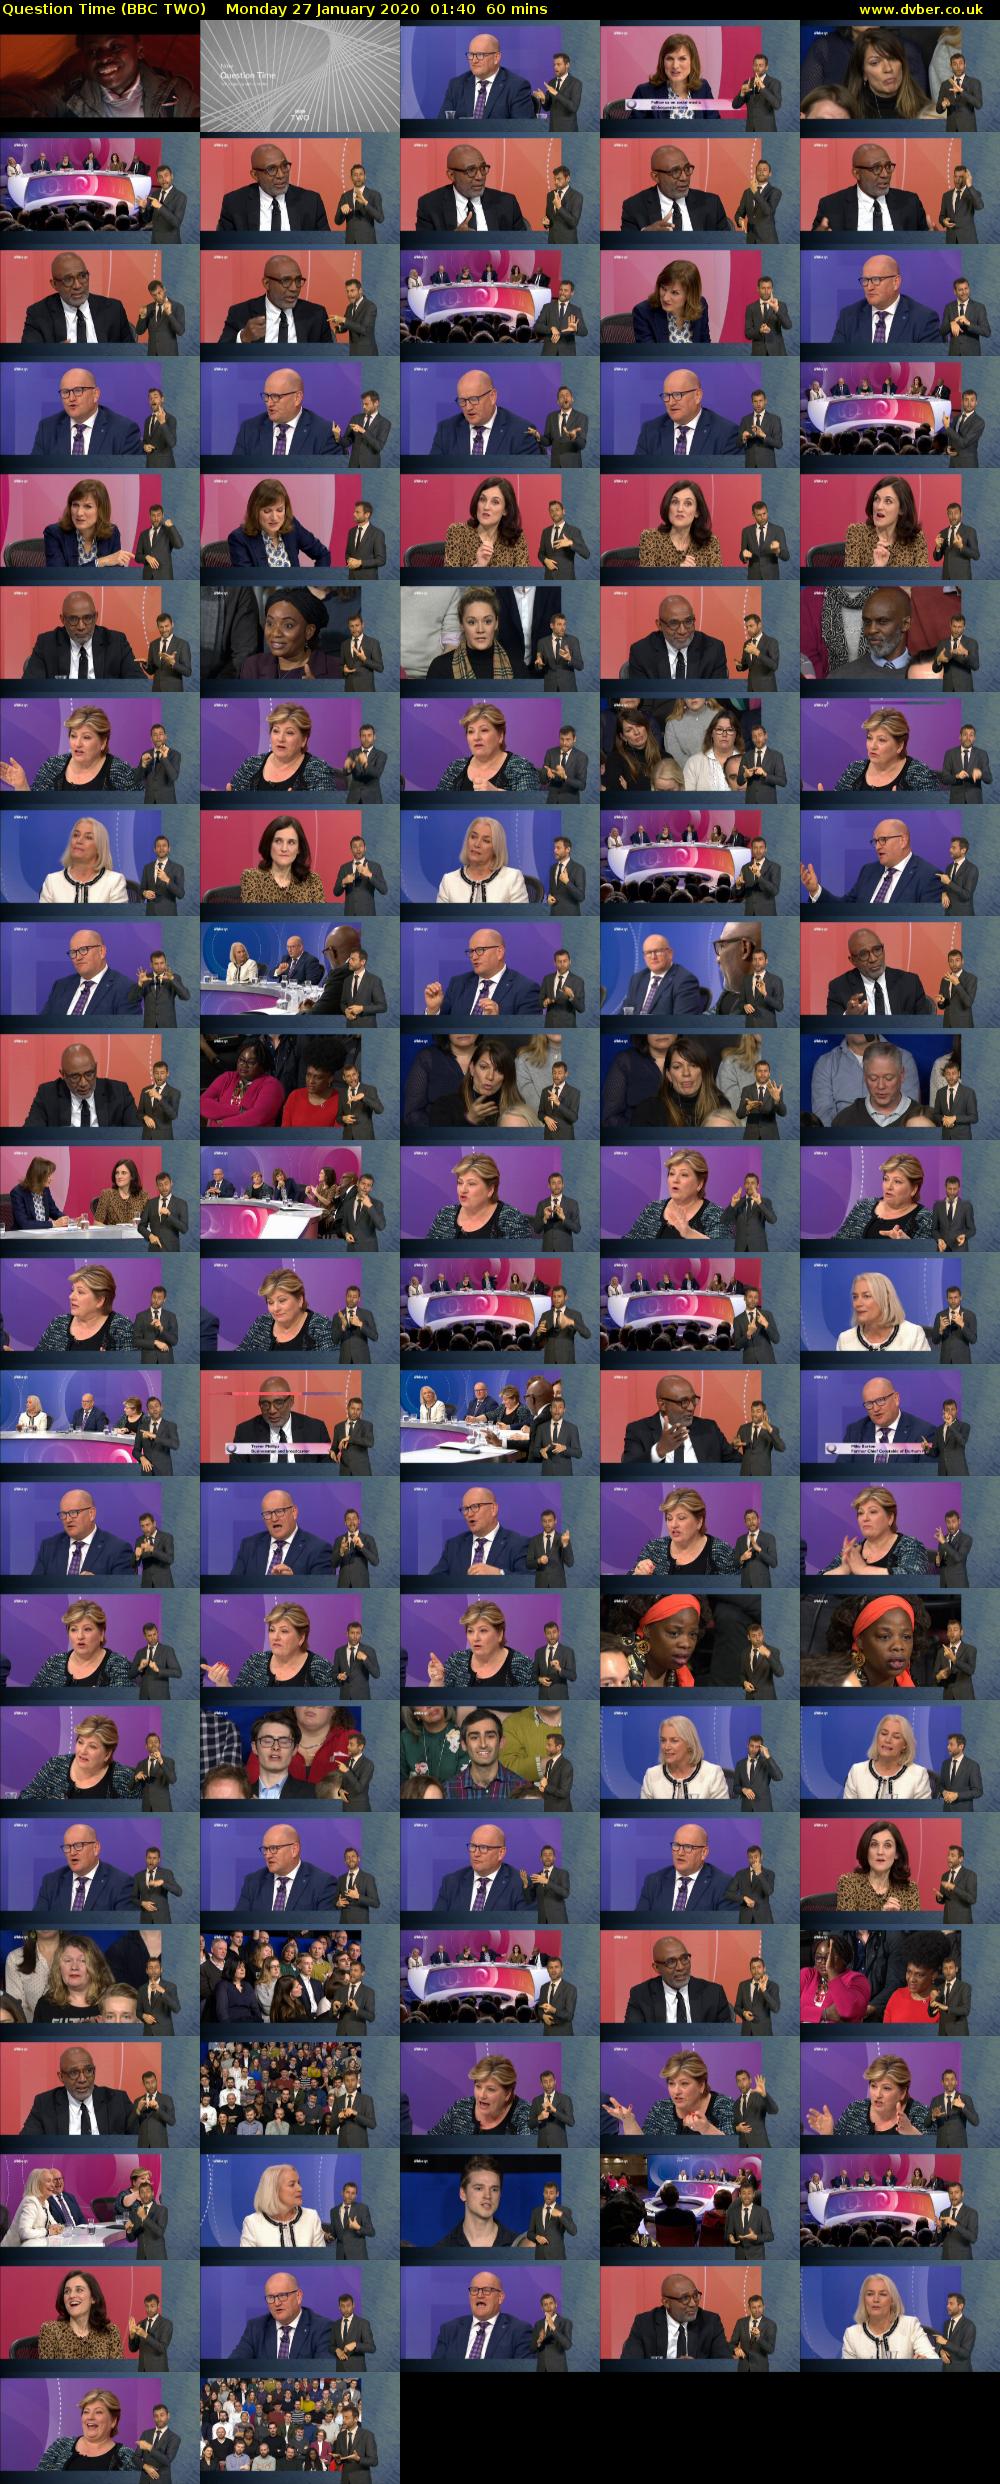 Question Time (BBC TWO) Monday 27 January 2020 01:40 - 02:40